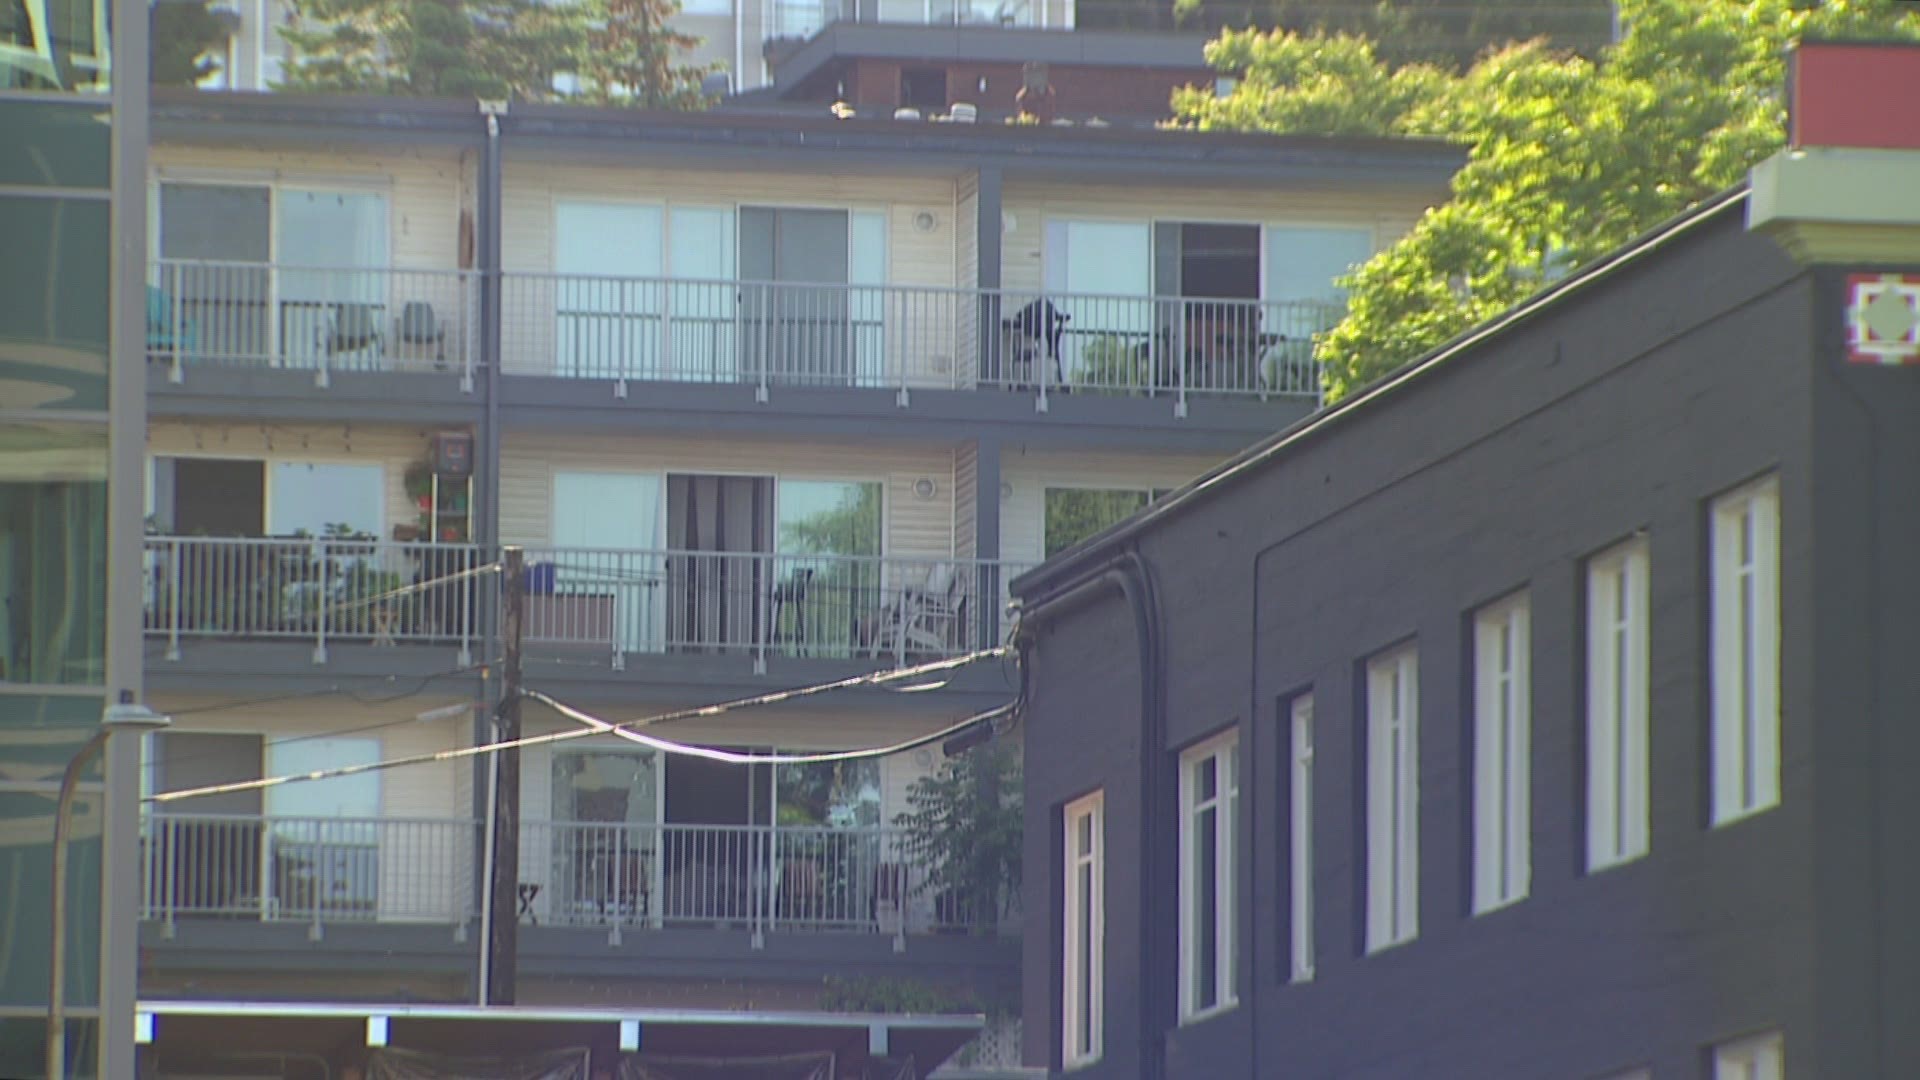 While the eviction moratorium is in place, property owners in Seattle may not issue notices of termination.